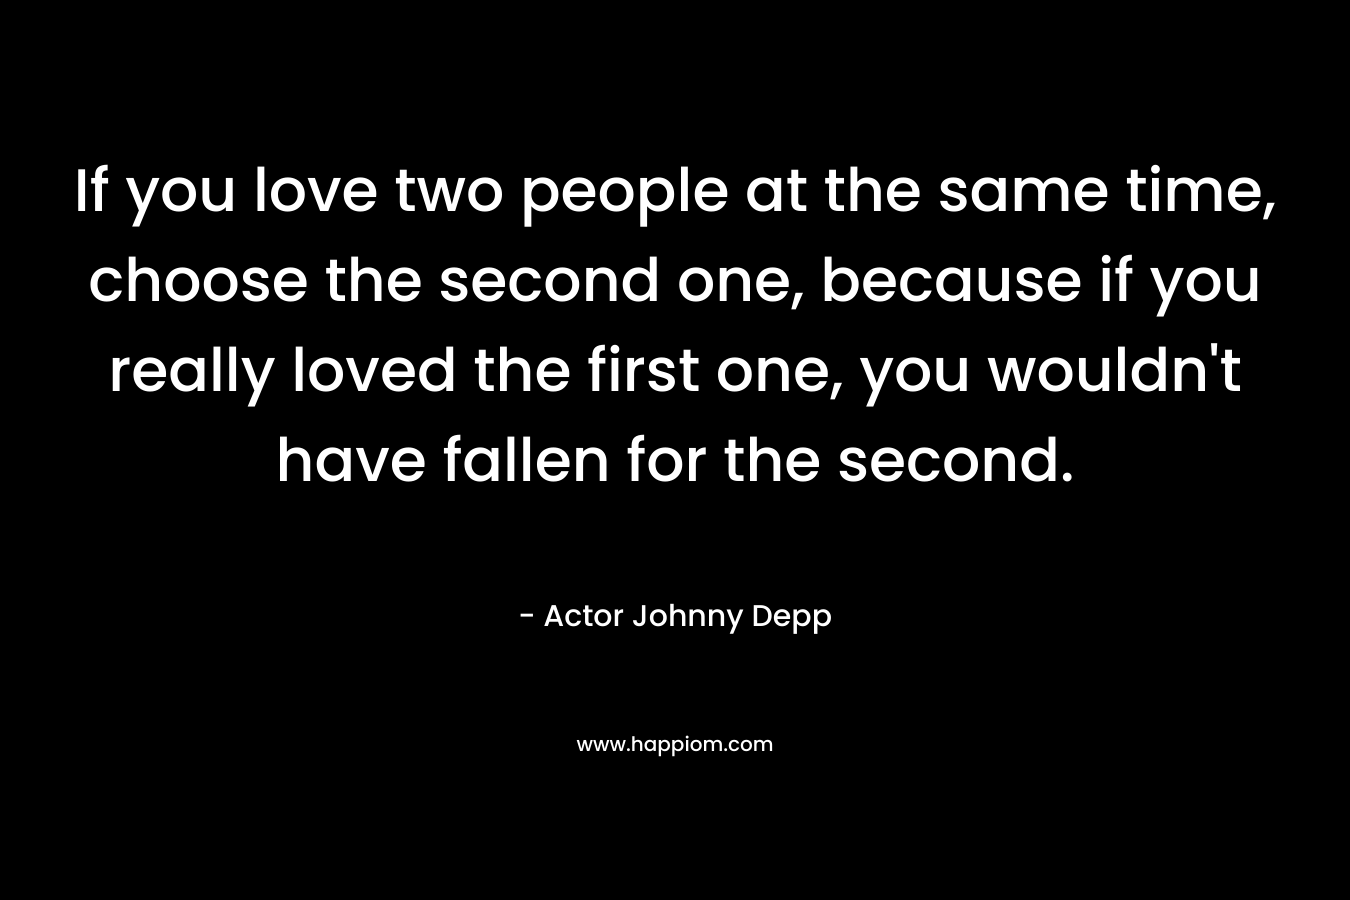 If you love two people at the same time, choose the second one, because if you really loved the first one, you wouldn't have fallen for the second.